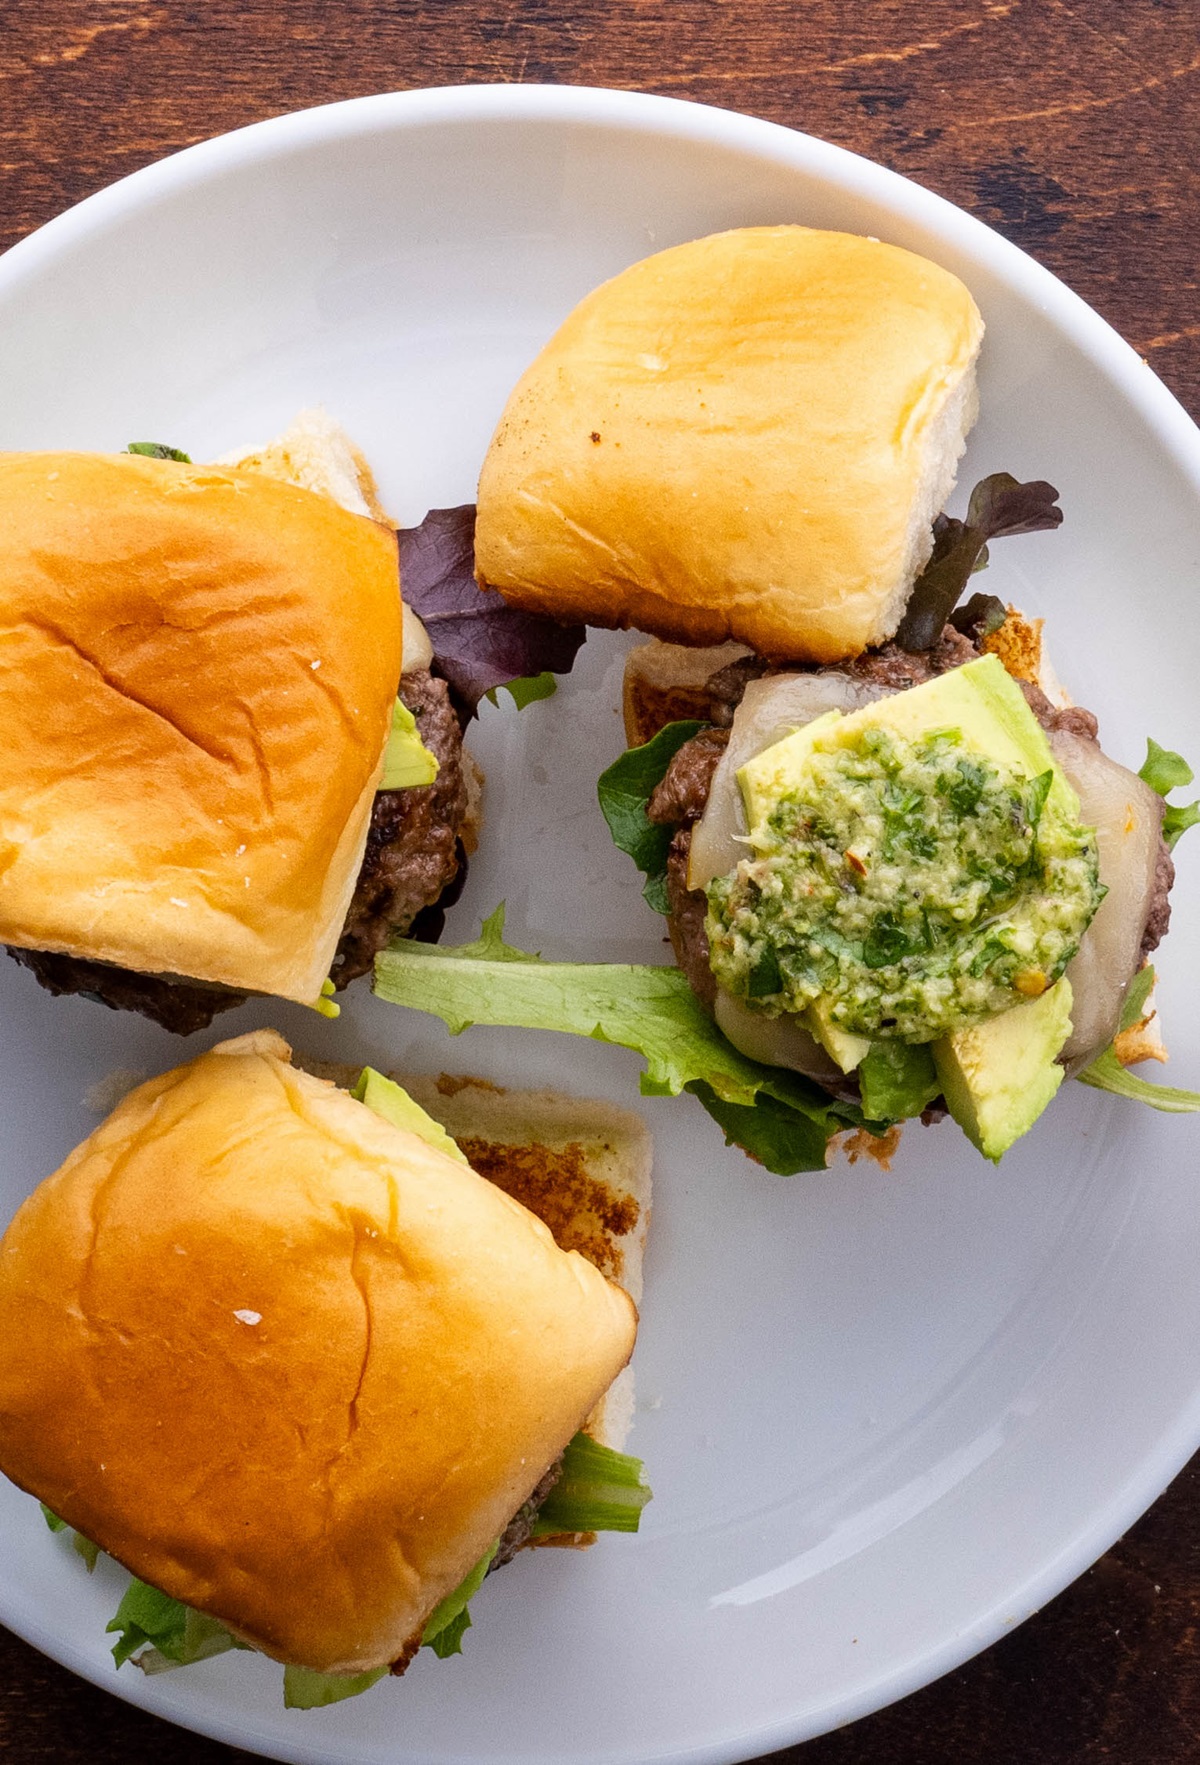 Three beef sliders on a plate, ready to eat.